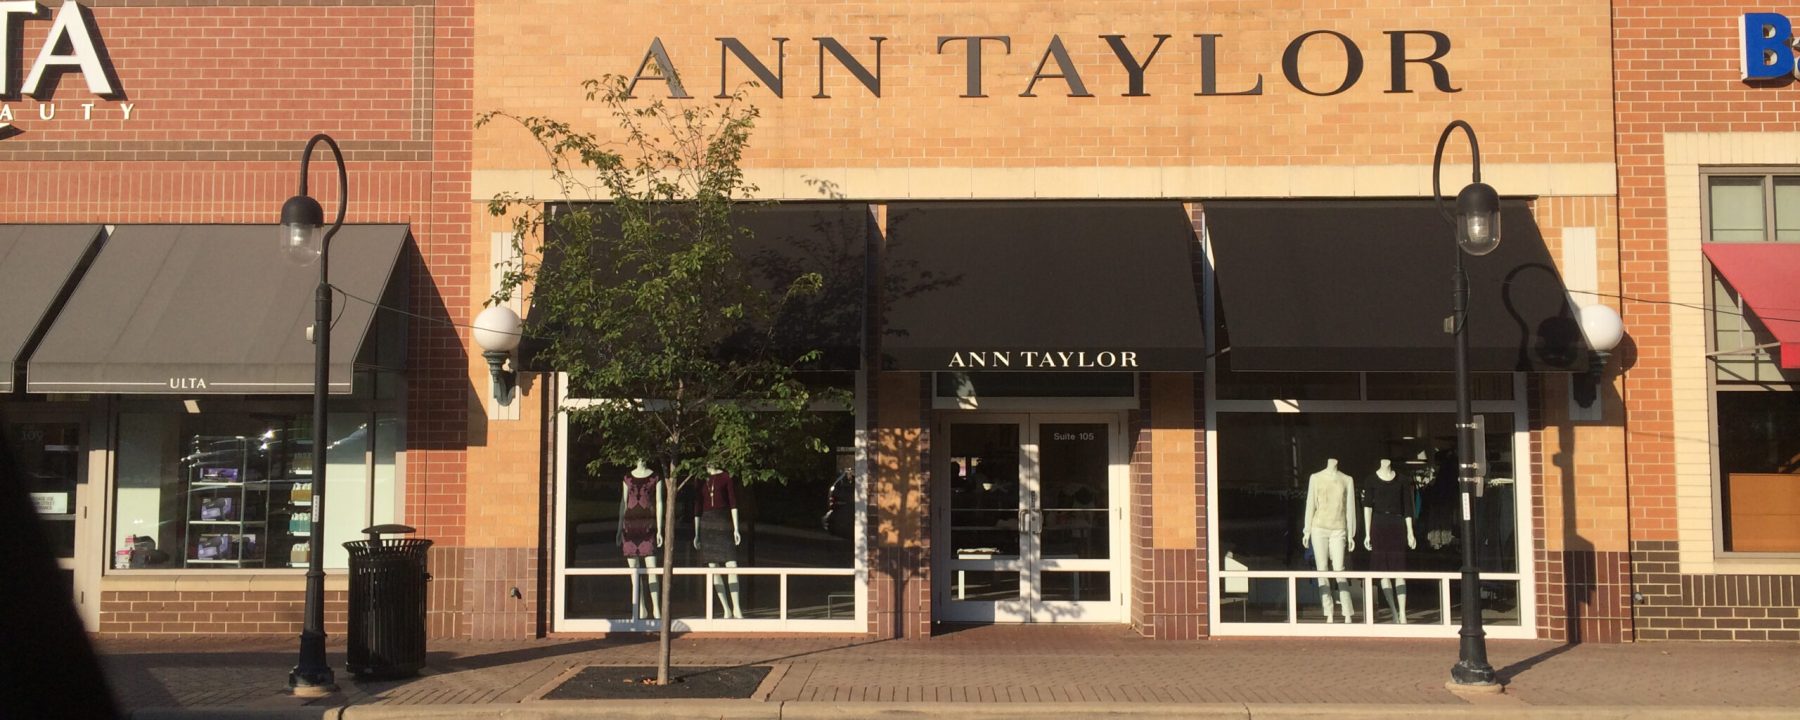 Ann Taylor Custom Outdoor Signs for Business in Napervill